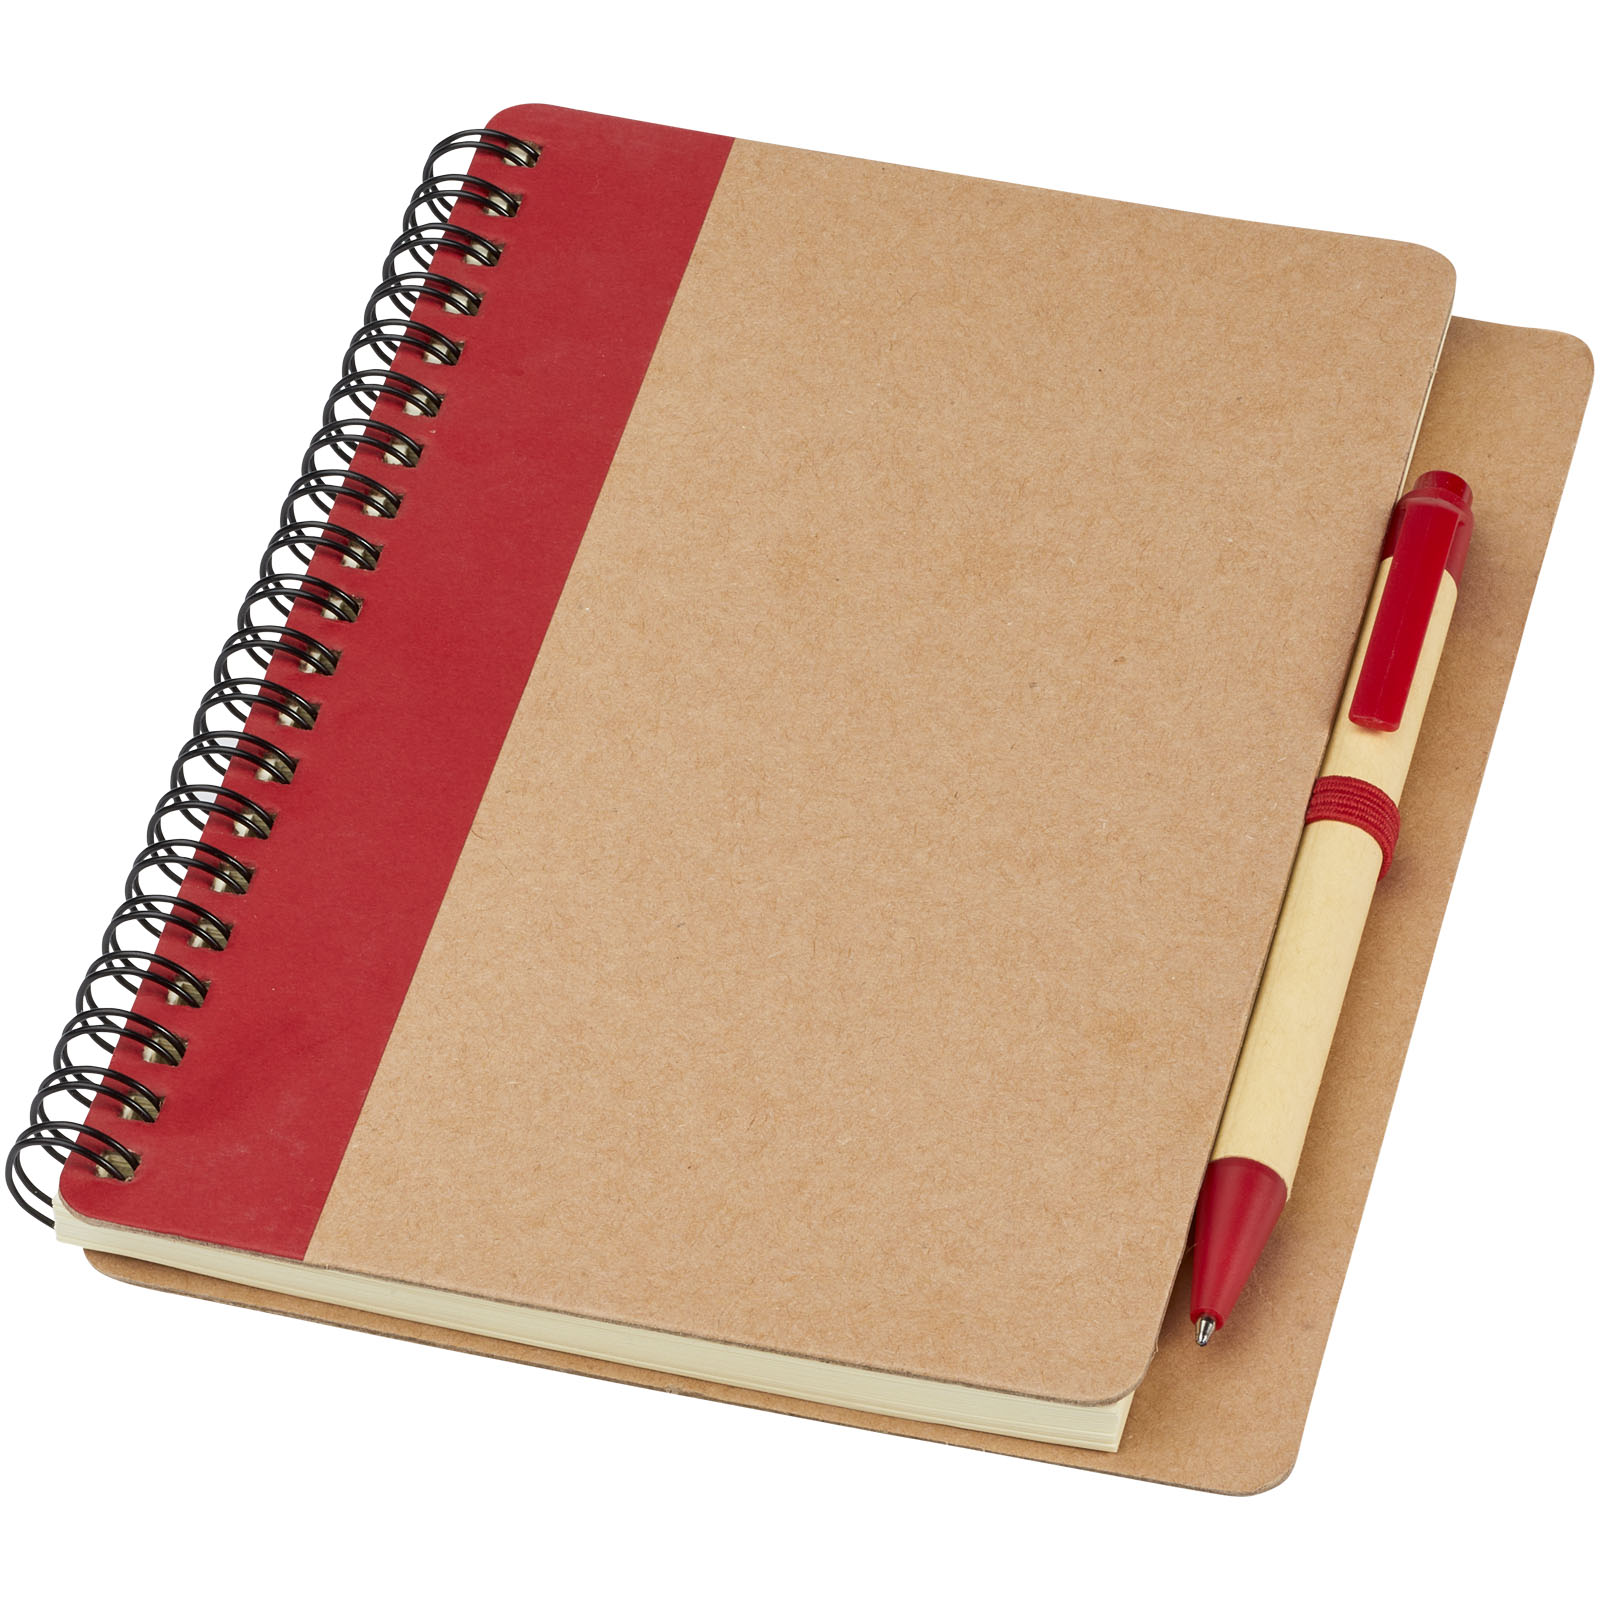 Hard cover notebooks - Priestly recycled notebook with pen